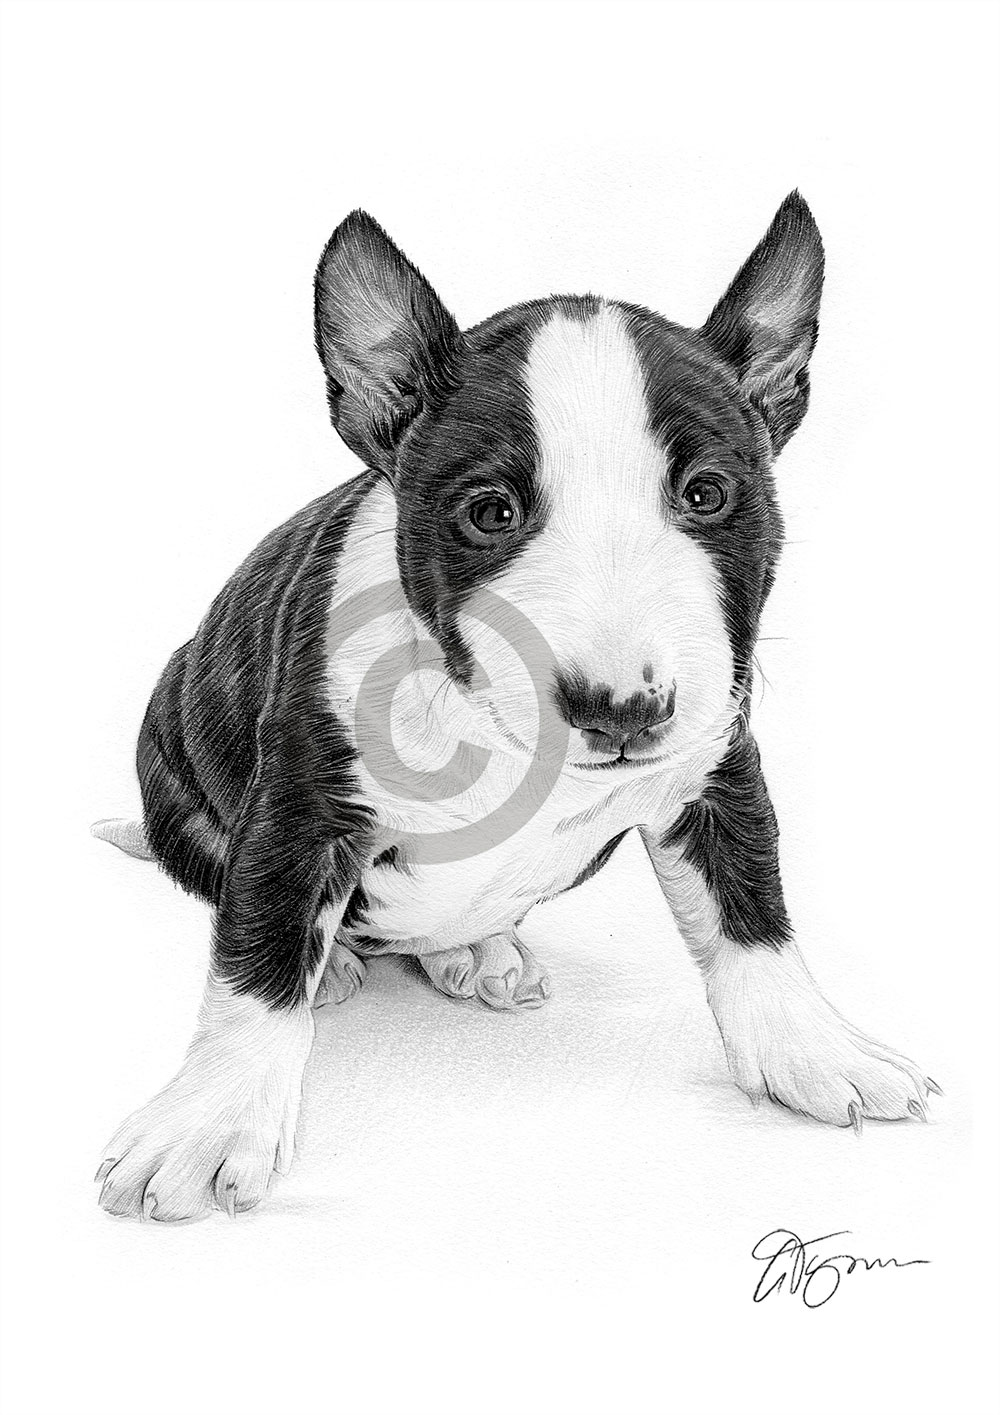 Pencil drawing of an English Bull Terrier puppy by artist Gary Tymon